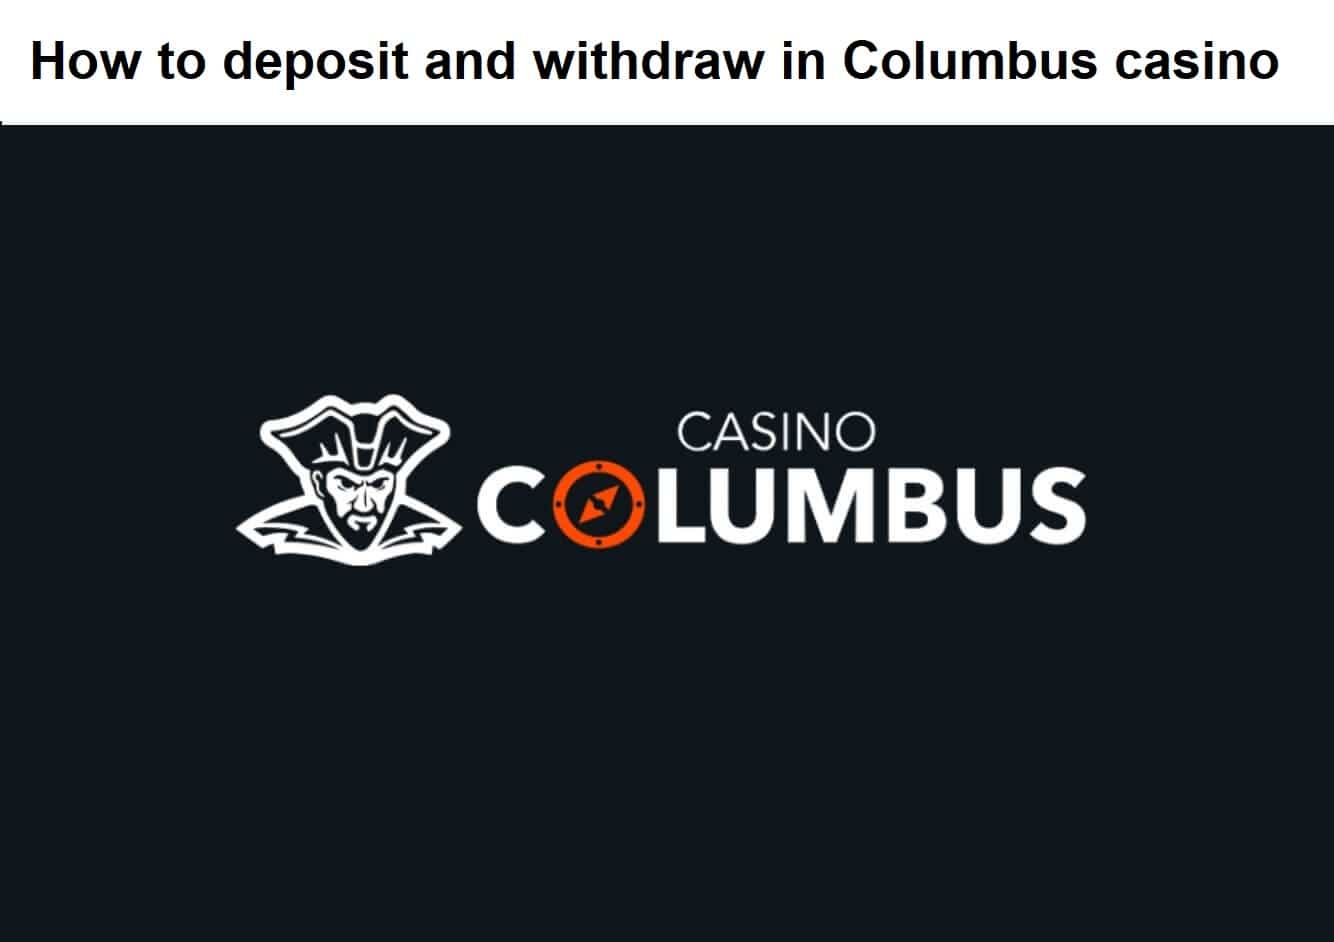 How to deposit money and withdraw funds from Columbus casino